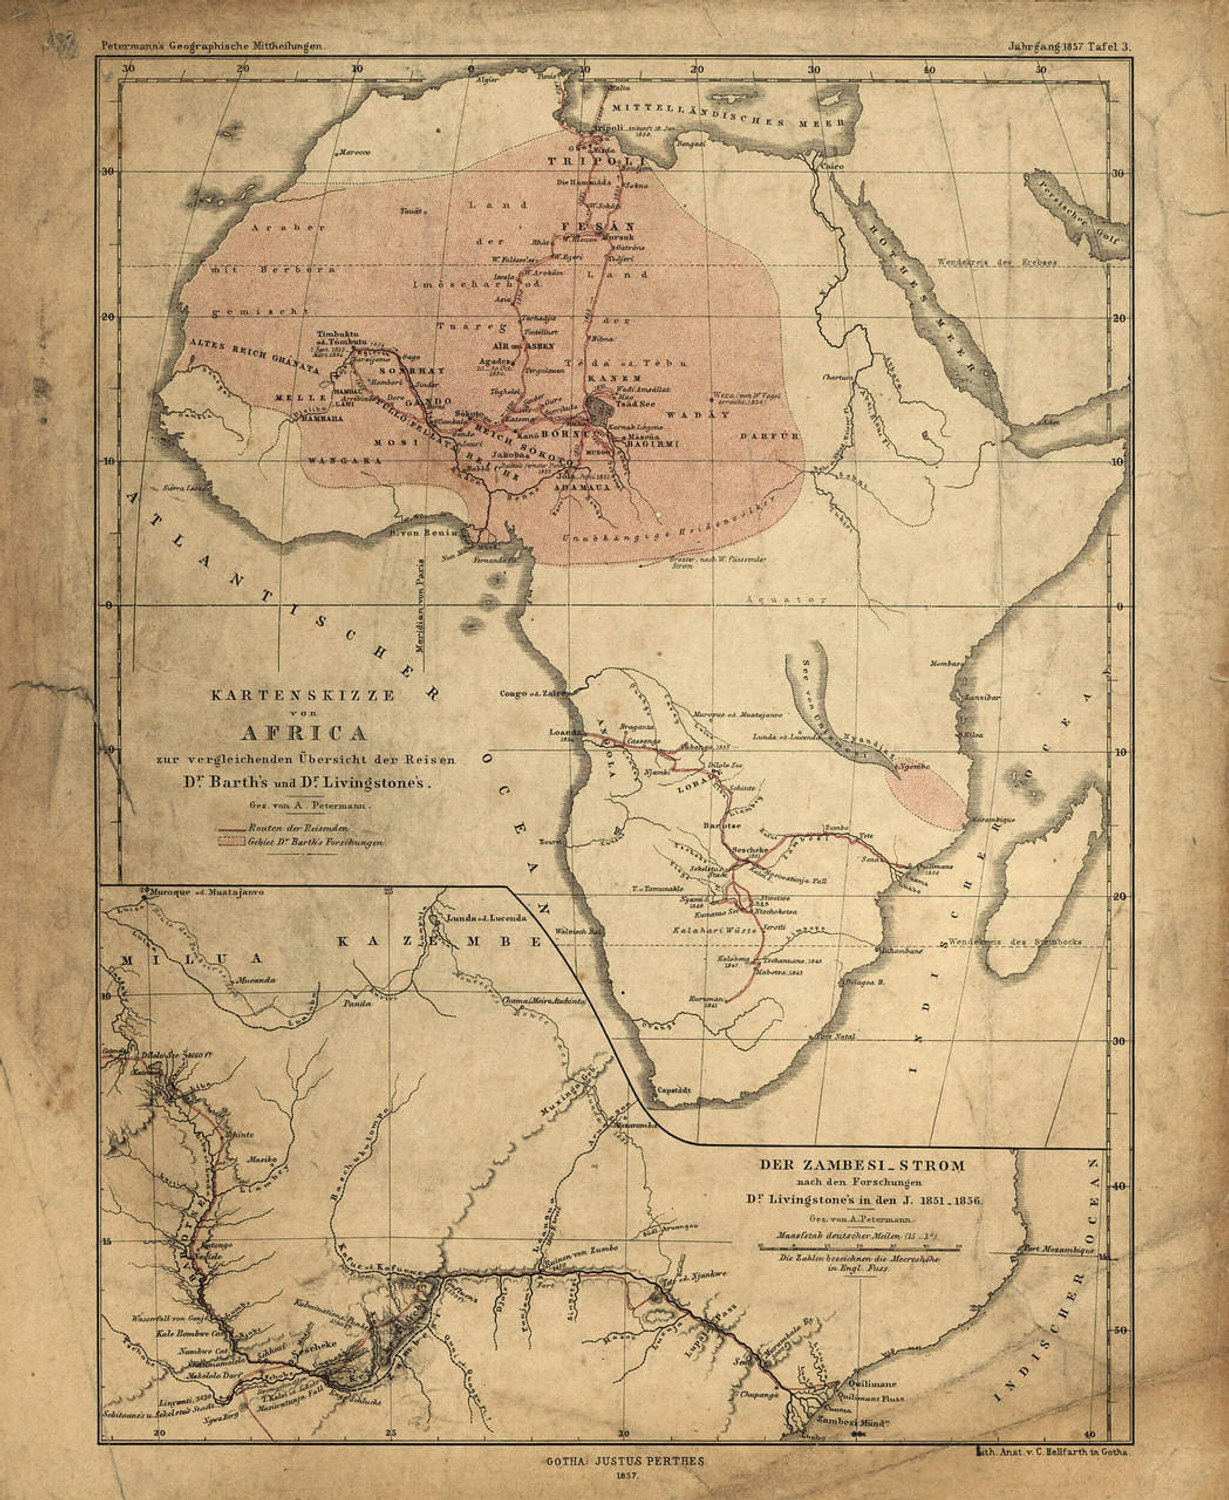 Historic Map - Africa - 1857, image 1, World Maps Online